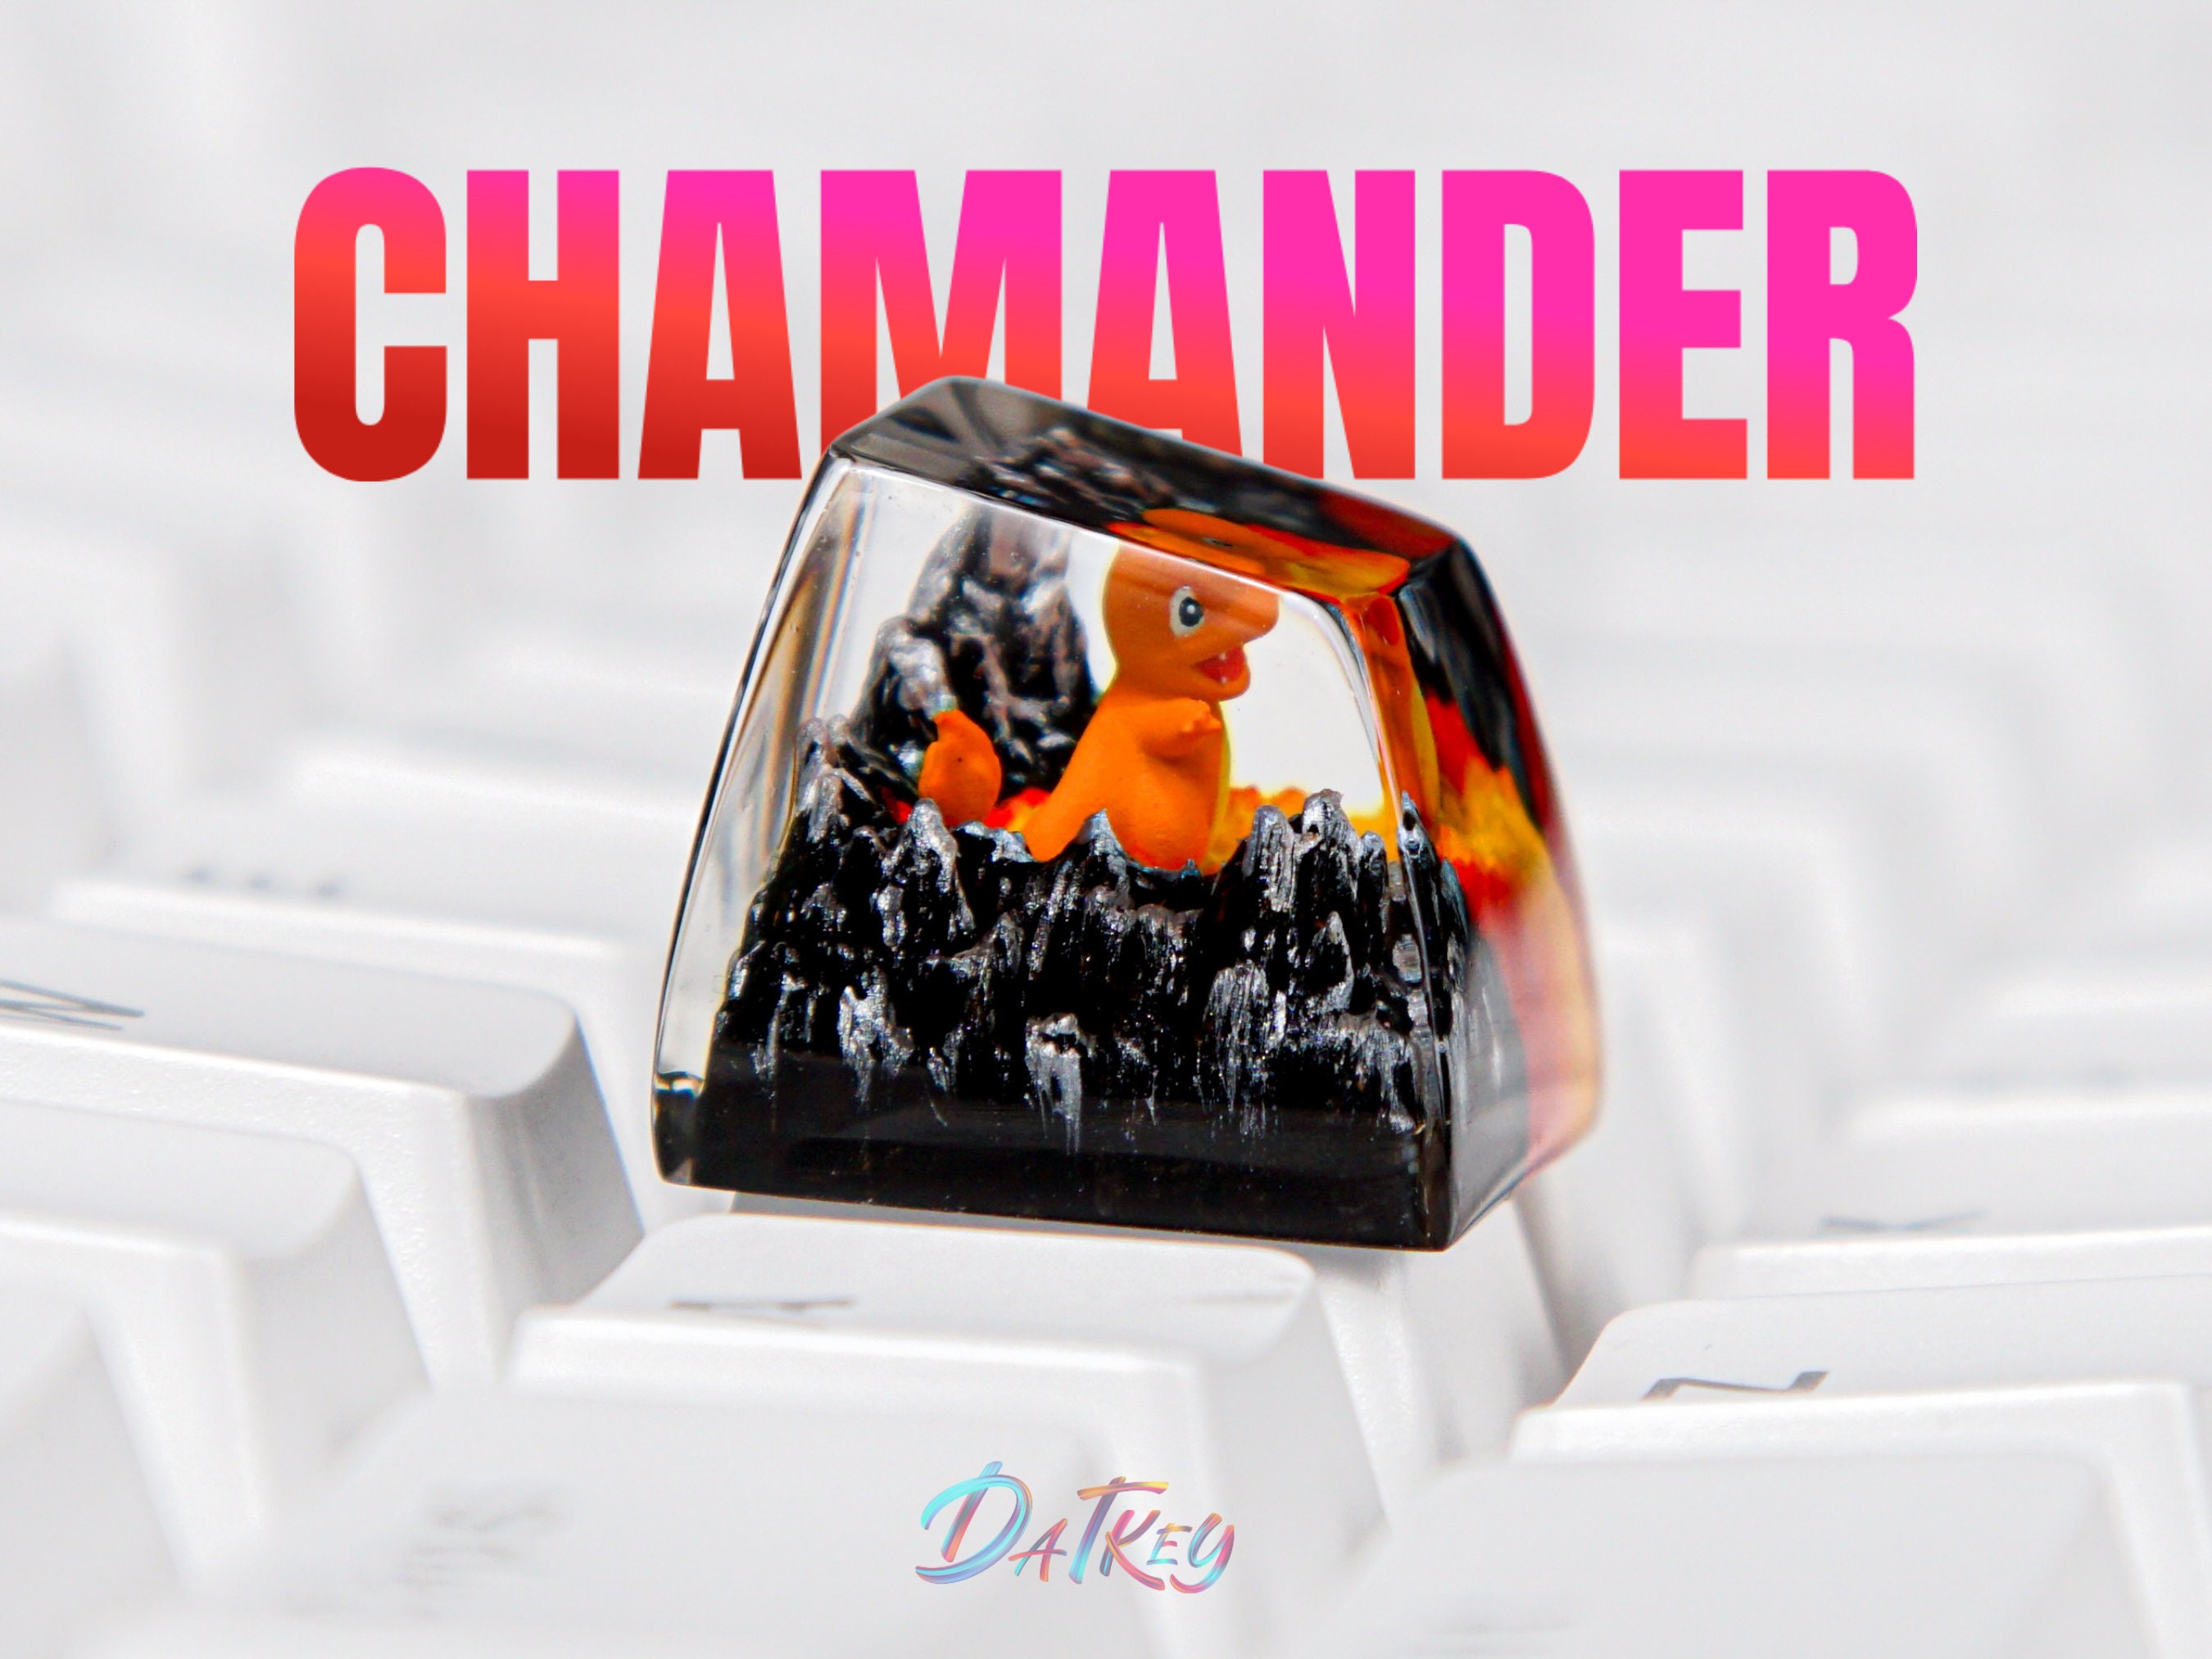 Charmander Keycap, Artisan Keycap, Resin Keycap, Keycap For Cherry MX Switches Mechanical Keyboard, Gift for Him